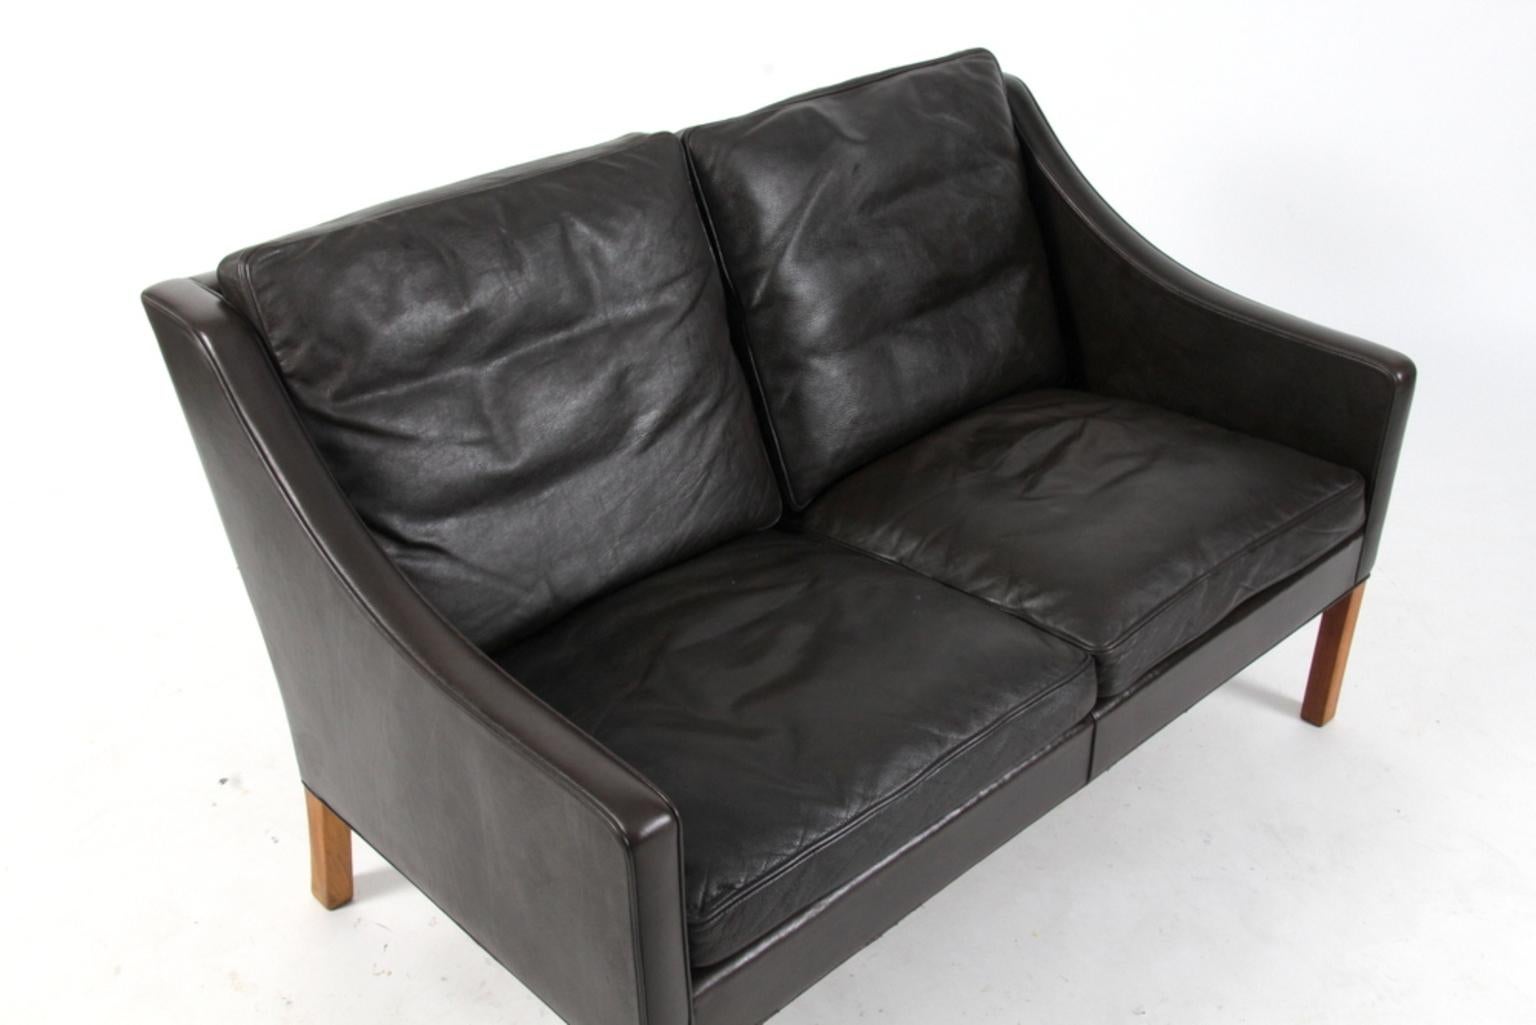 Børge Mogensen two-seat sofa original upholstered with dark brown leather upholstery.

Legs of mahogany.

Model 2208, made by Fredericia furniture.